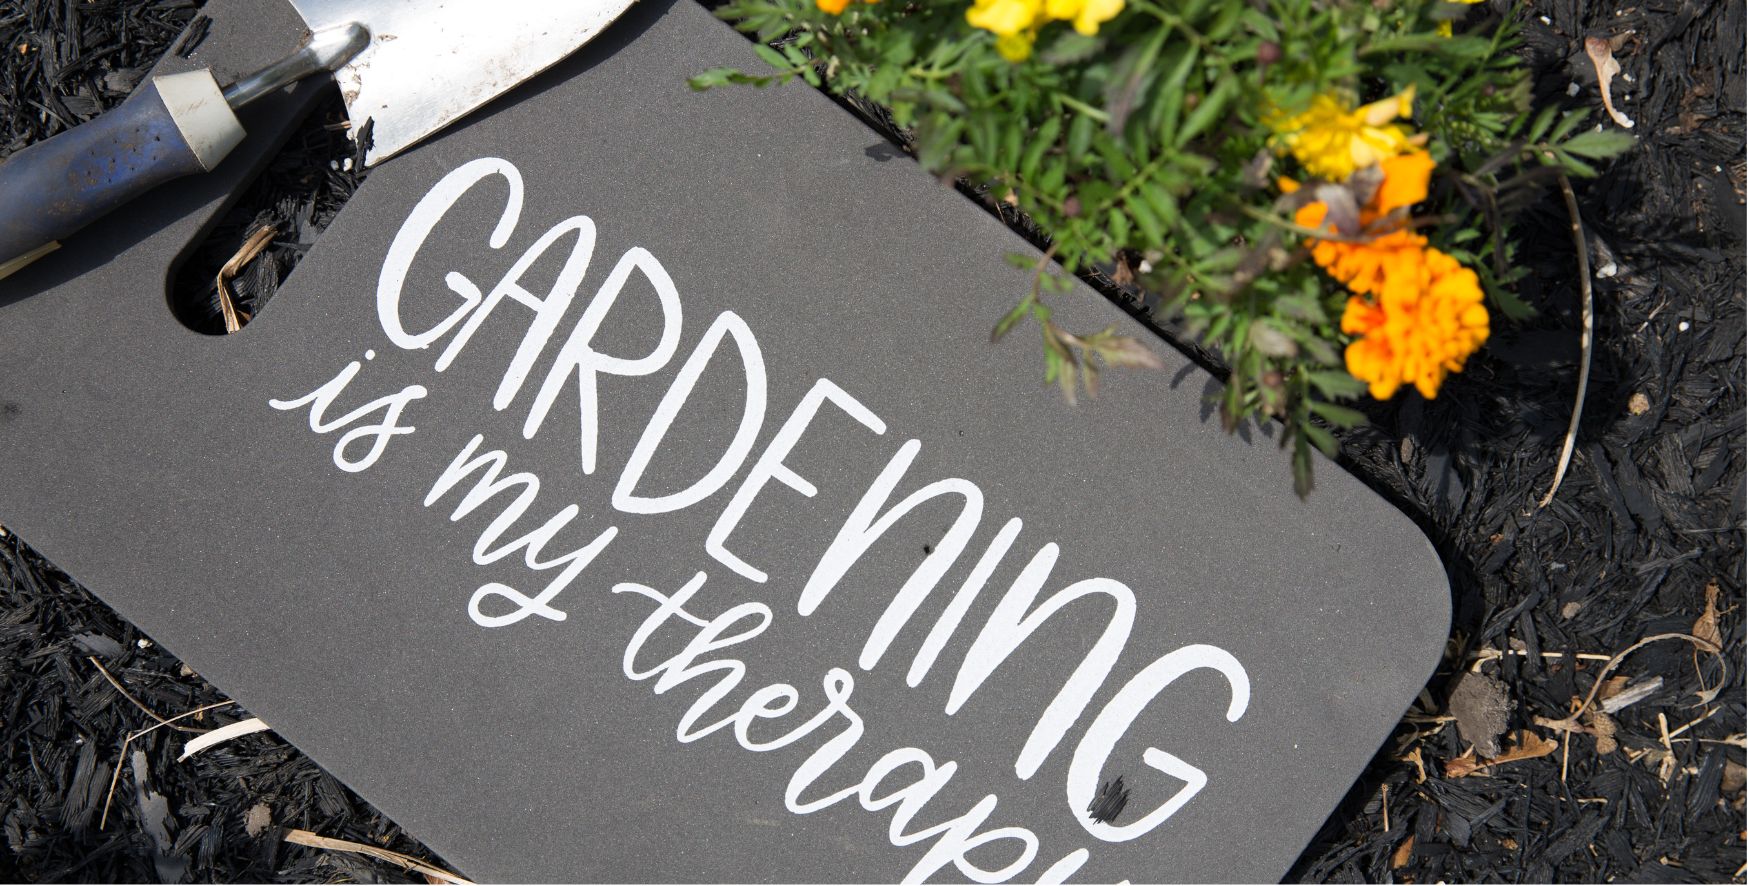 Kneeling pad that says 'Gardening is my therapy'